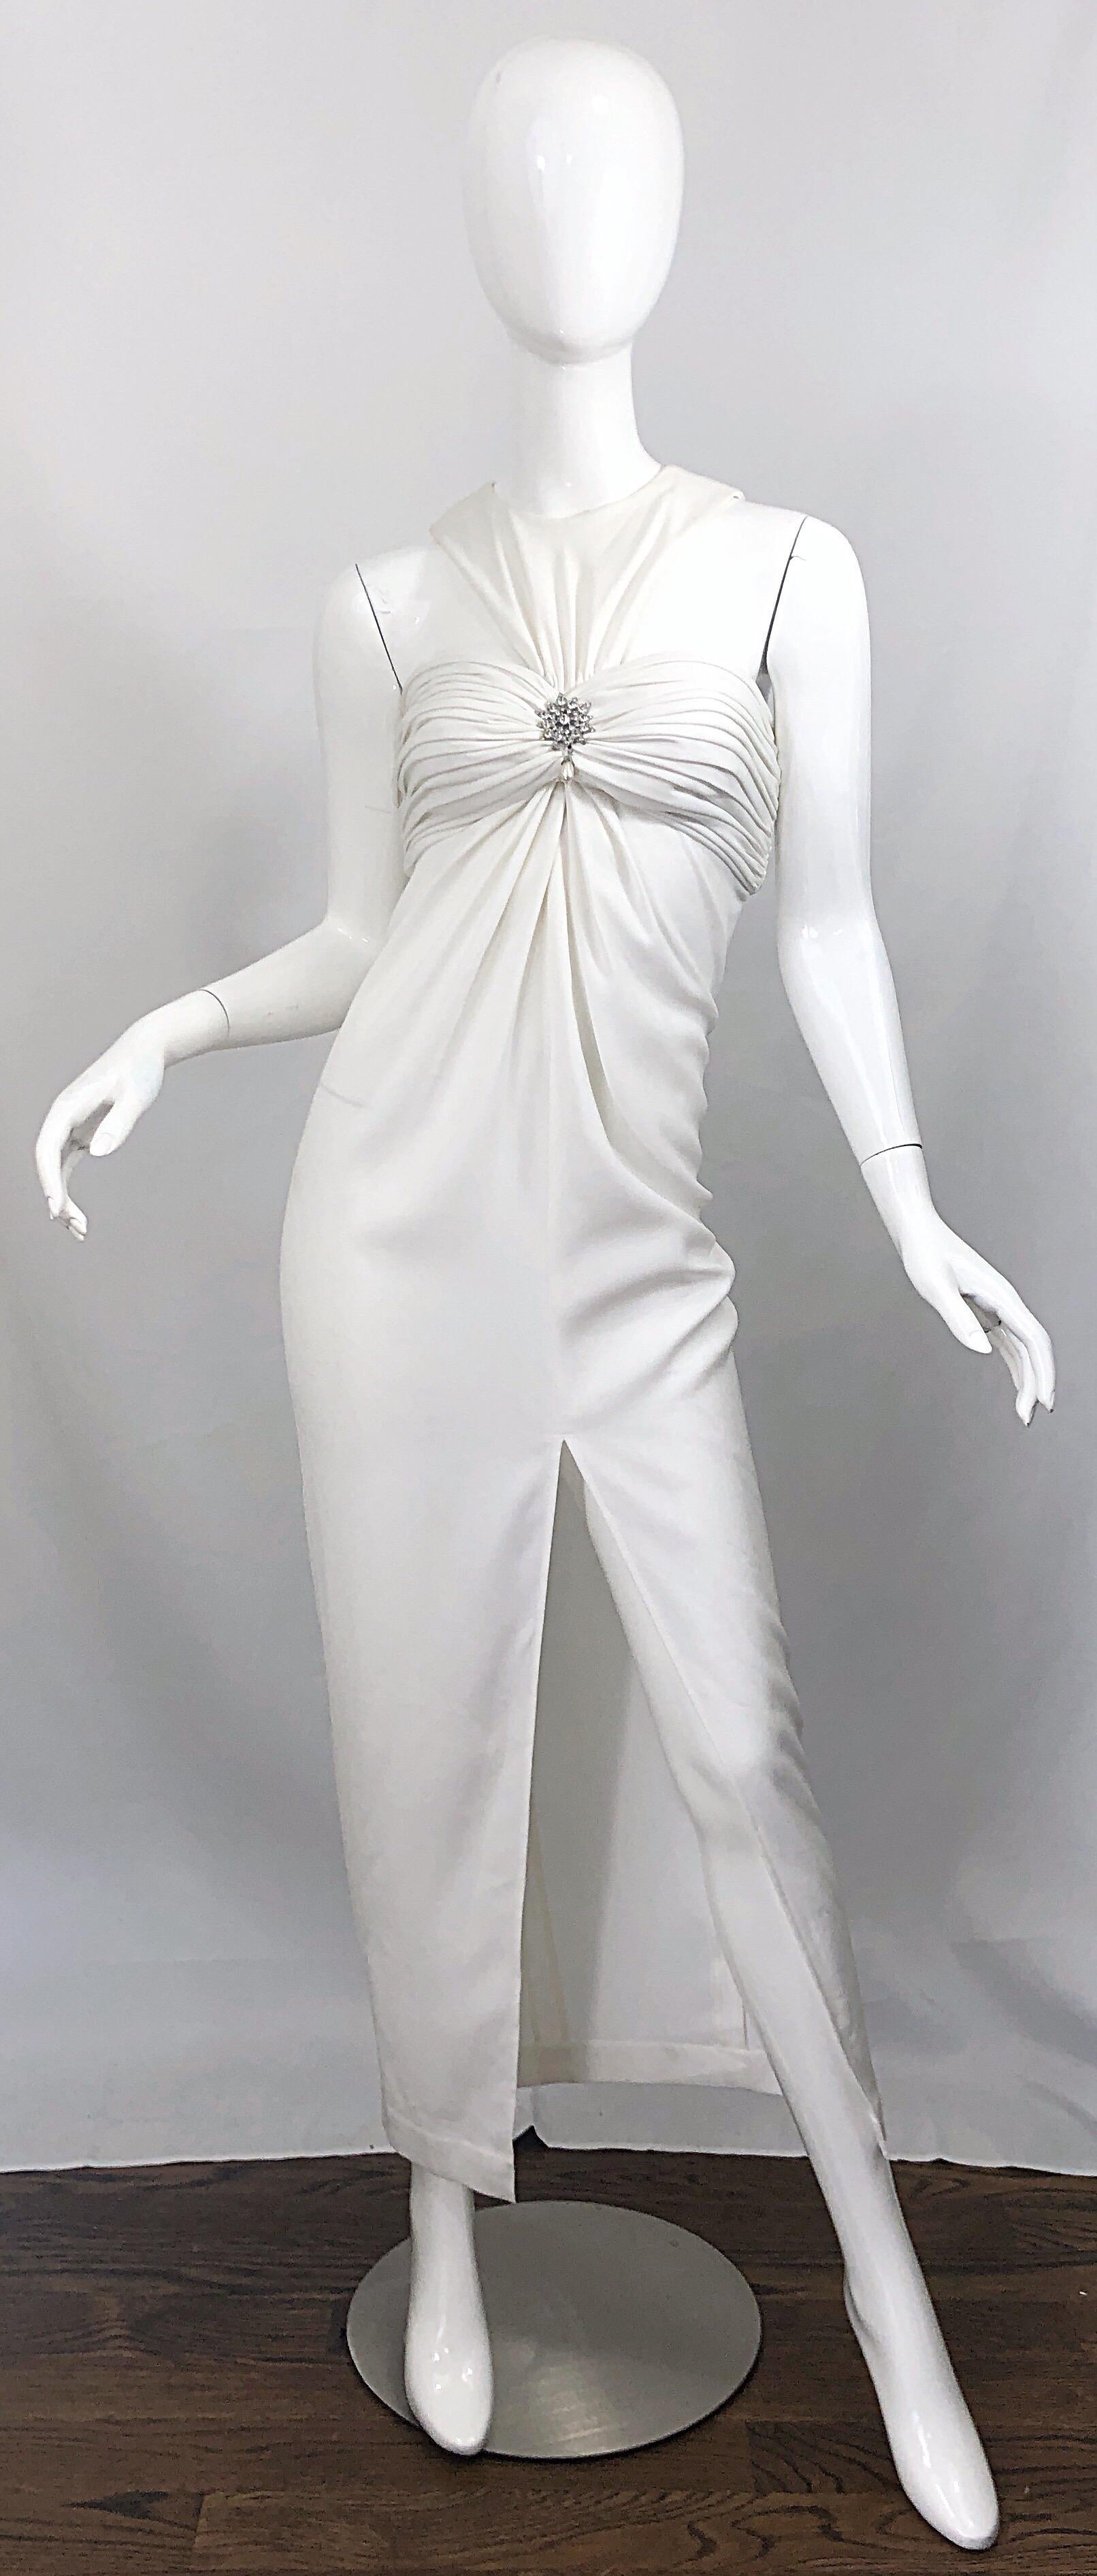 Beautiful 1980s vintage TADASHI SHOJI avant garde white 
cut-out full length crepe evening dress! Features cut out detail above bust. Pearl and rhinestone encrusted details at center bust. Hidden zipper up the back with hook-and-eye closure. Slit up